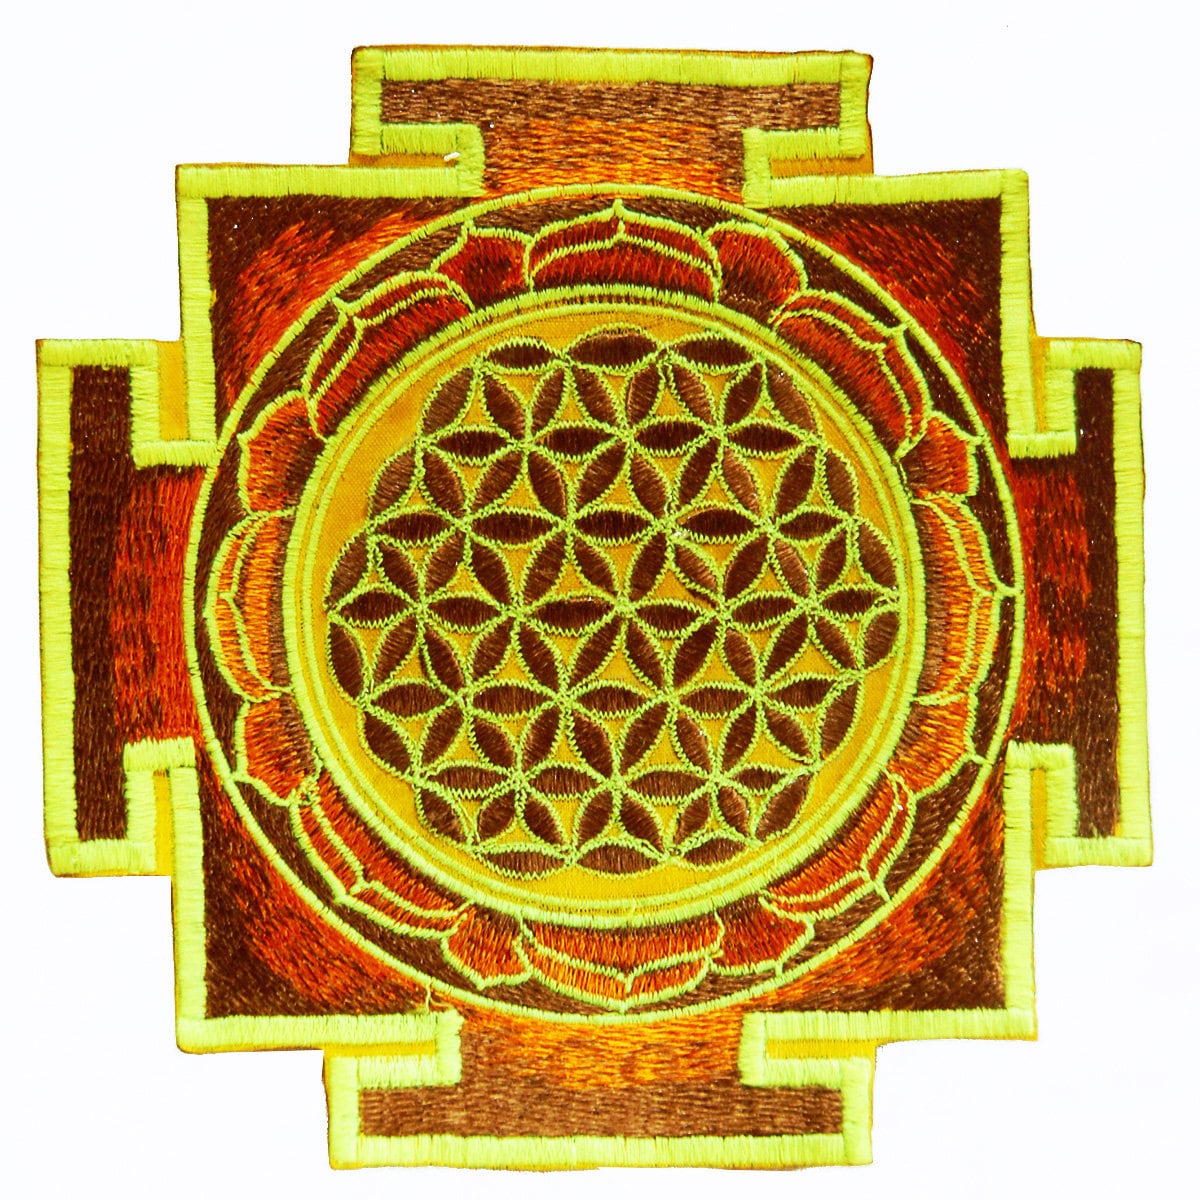 Goldbrown flower of life yantra sacred geometry patch holy healing information art